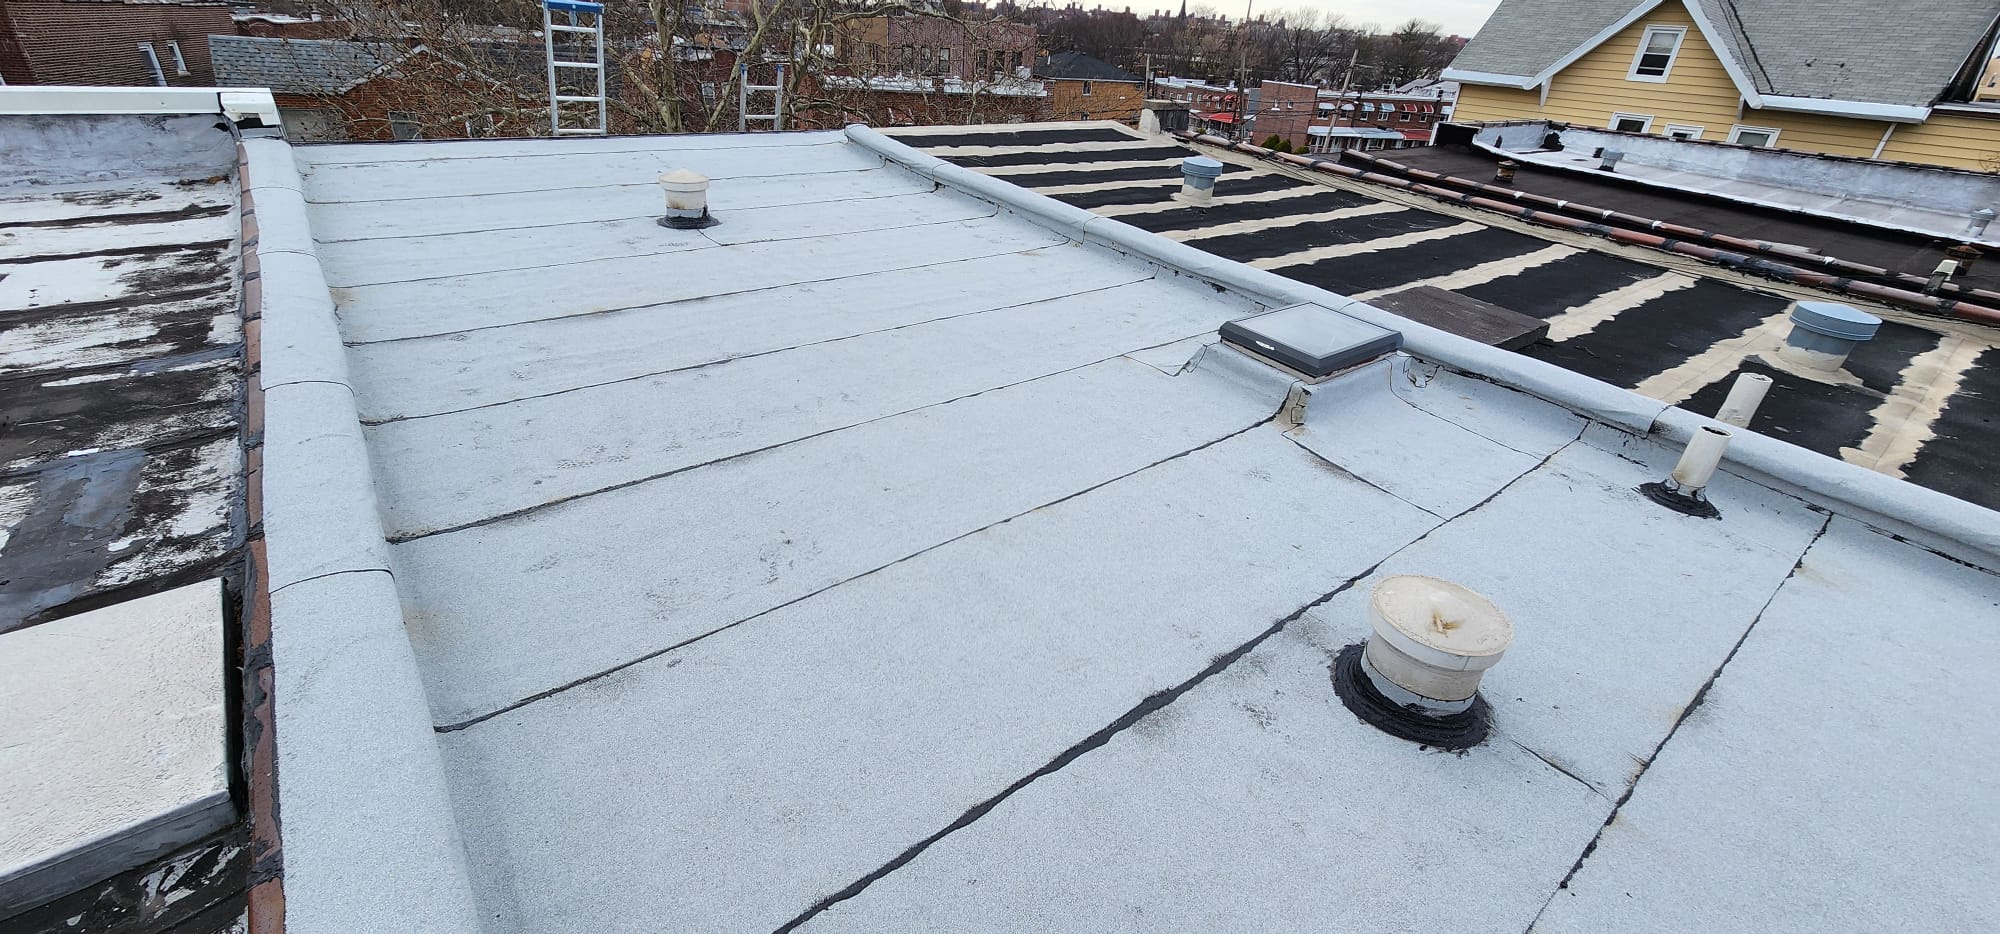 New Aluminum Flat Roof Installation in the Bronx NYC Project Shot 5